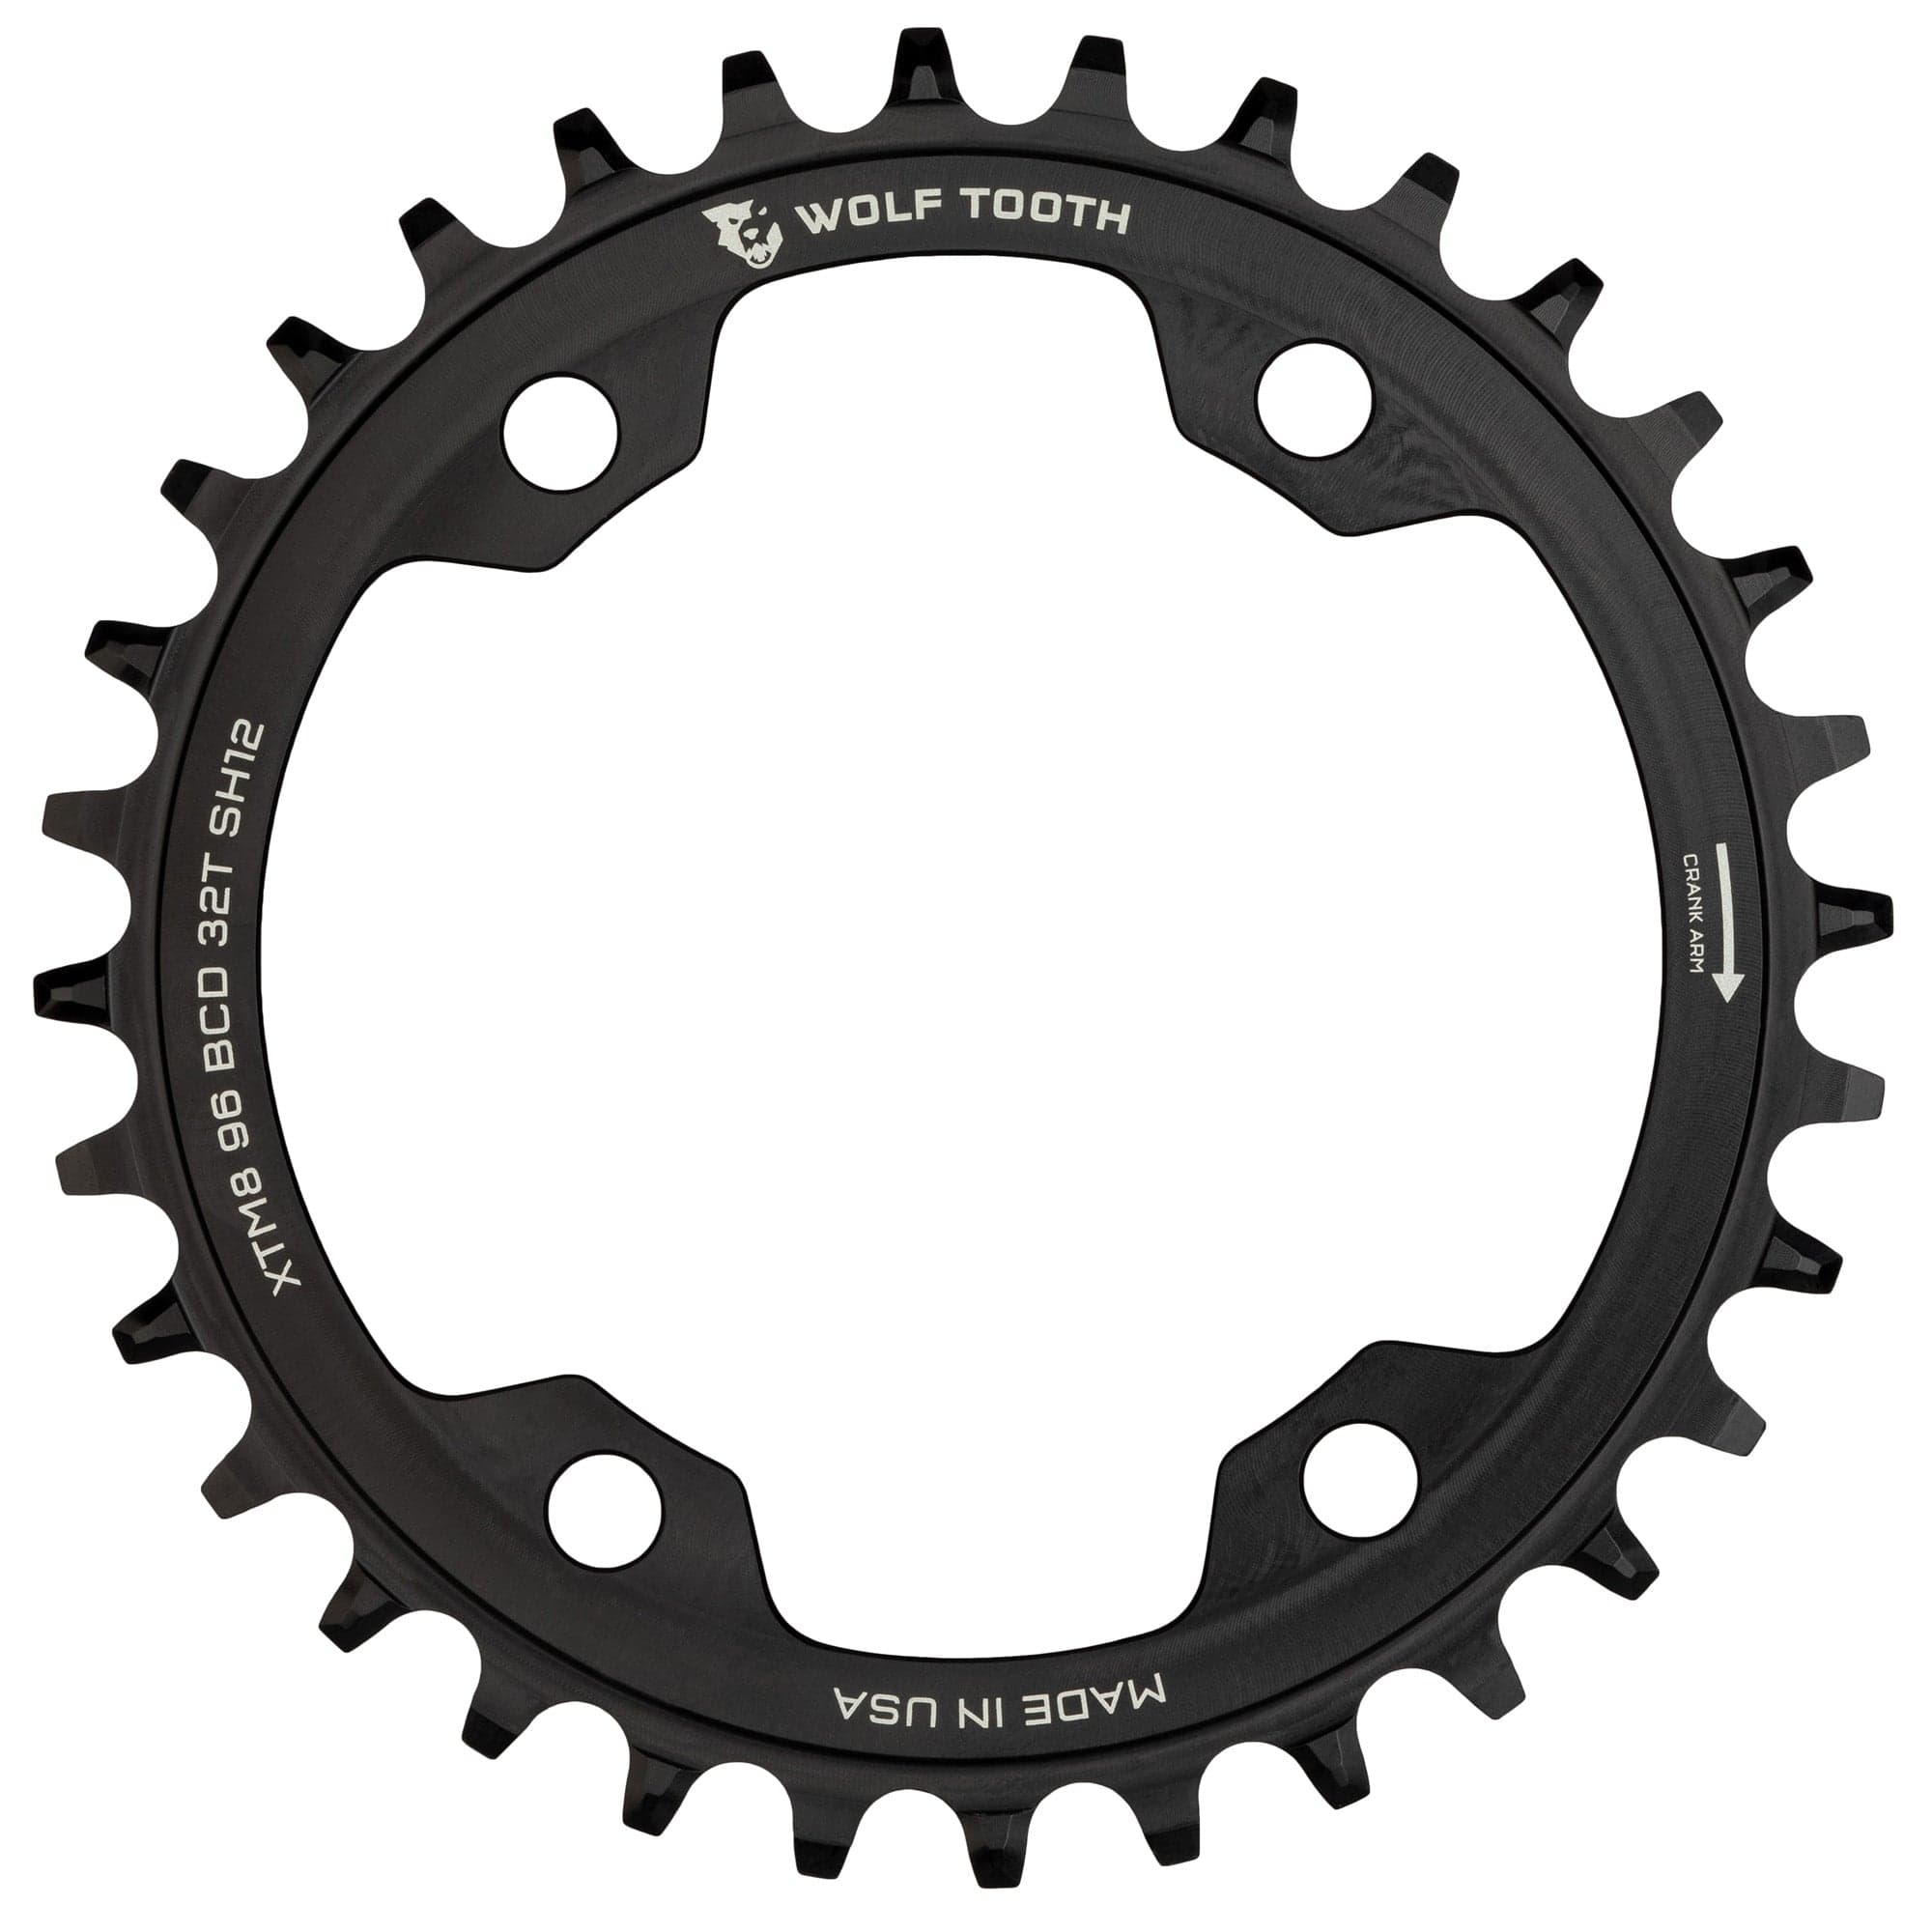 shimano chainring replacement